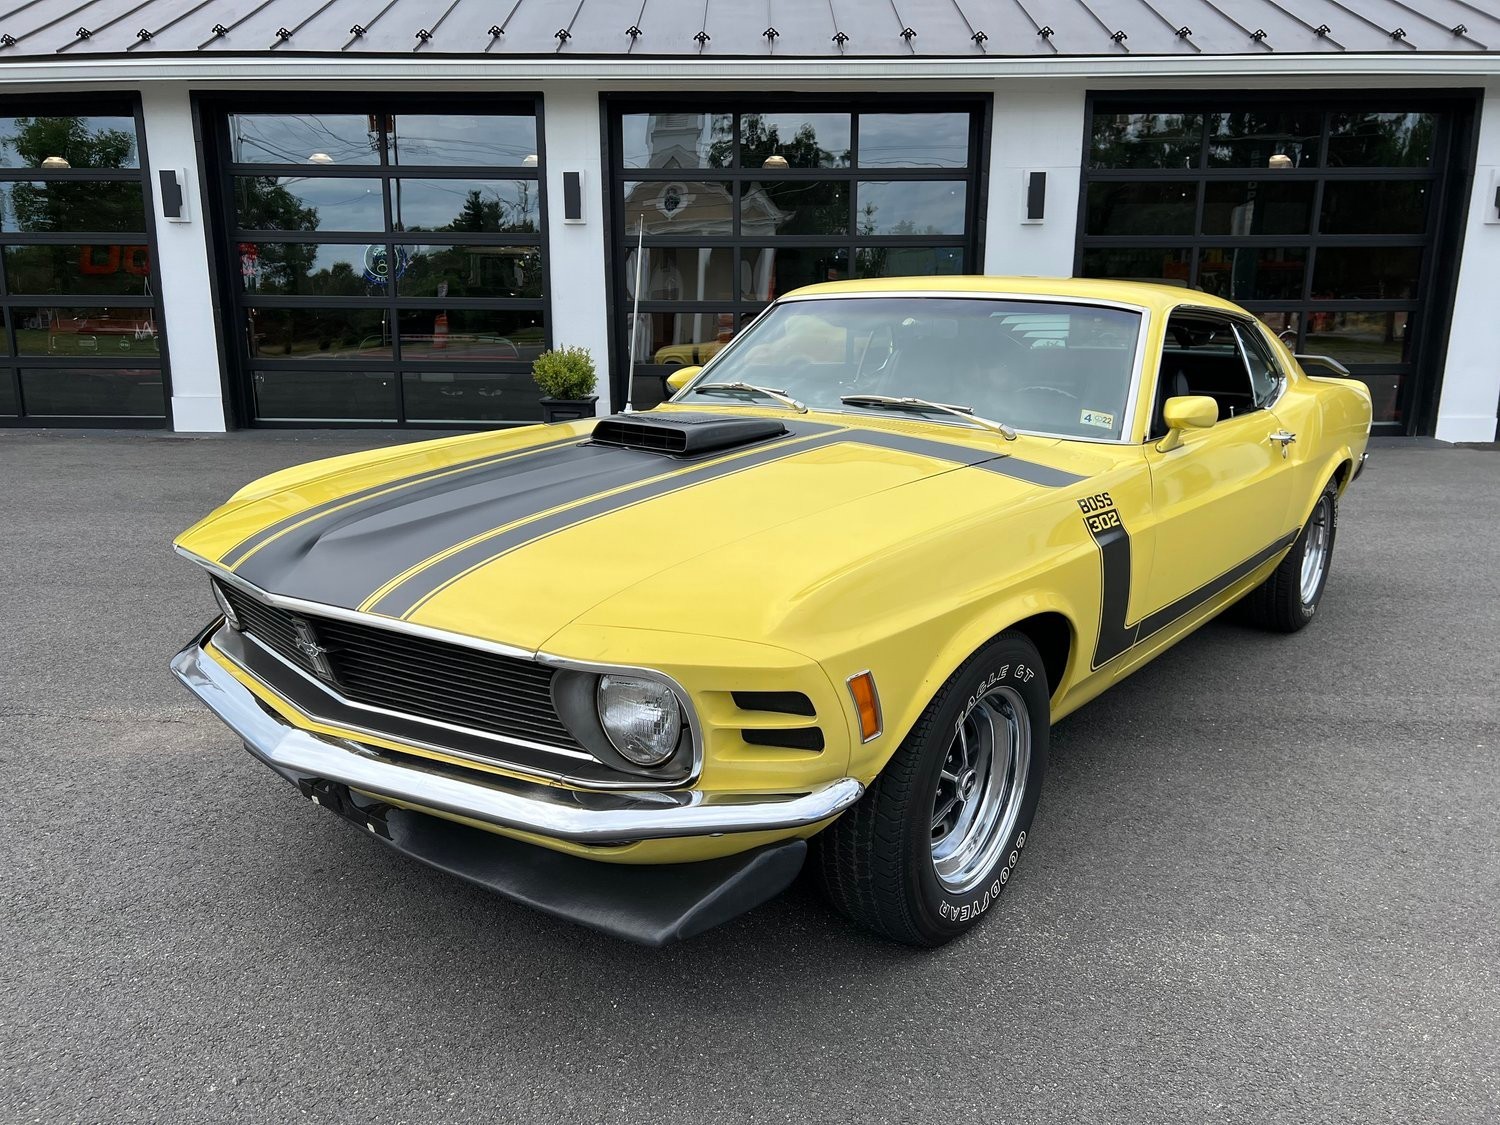 Survivor All-Original Boss 302 From 1970 in Mint Condition Shines ...